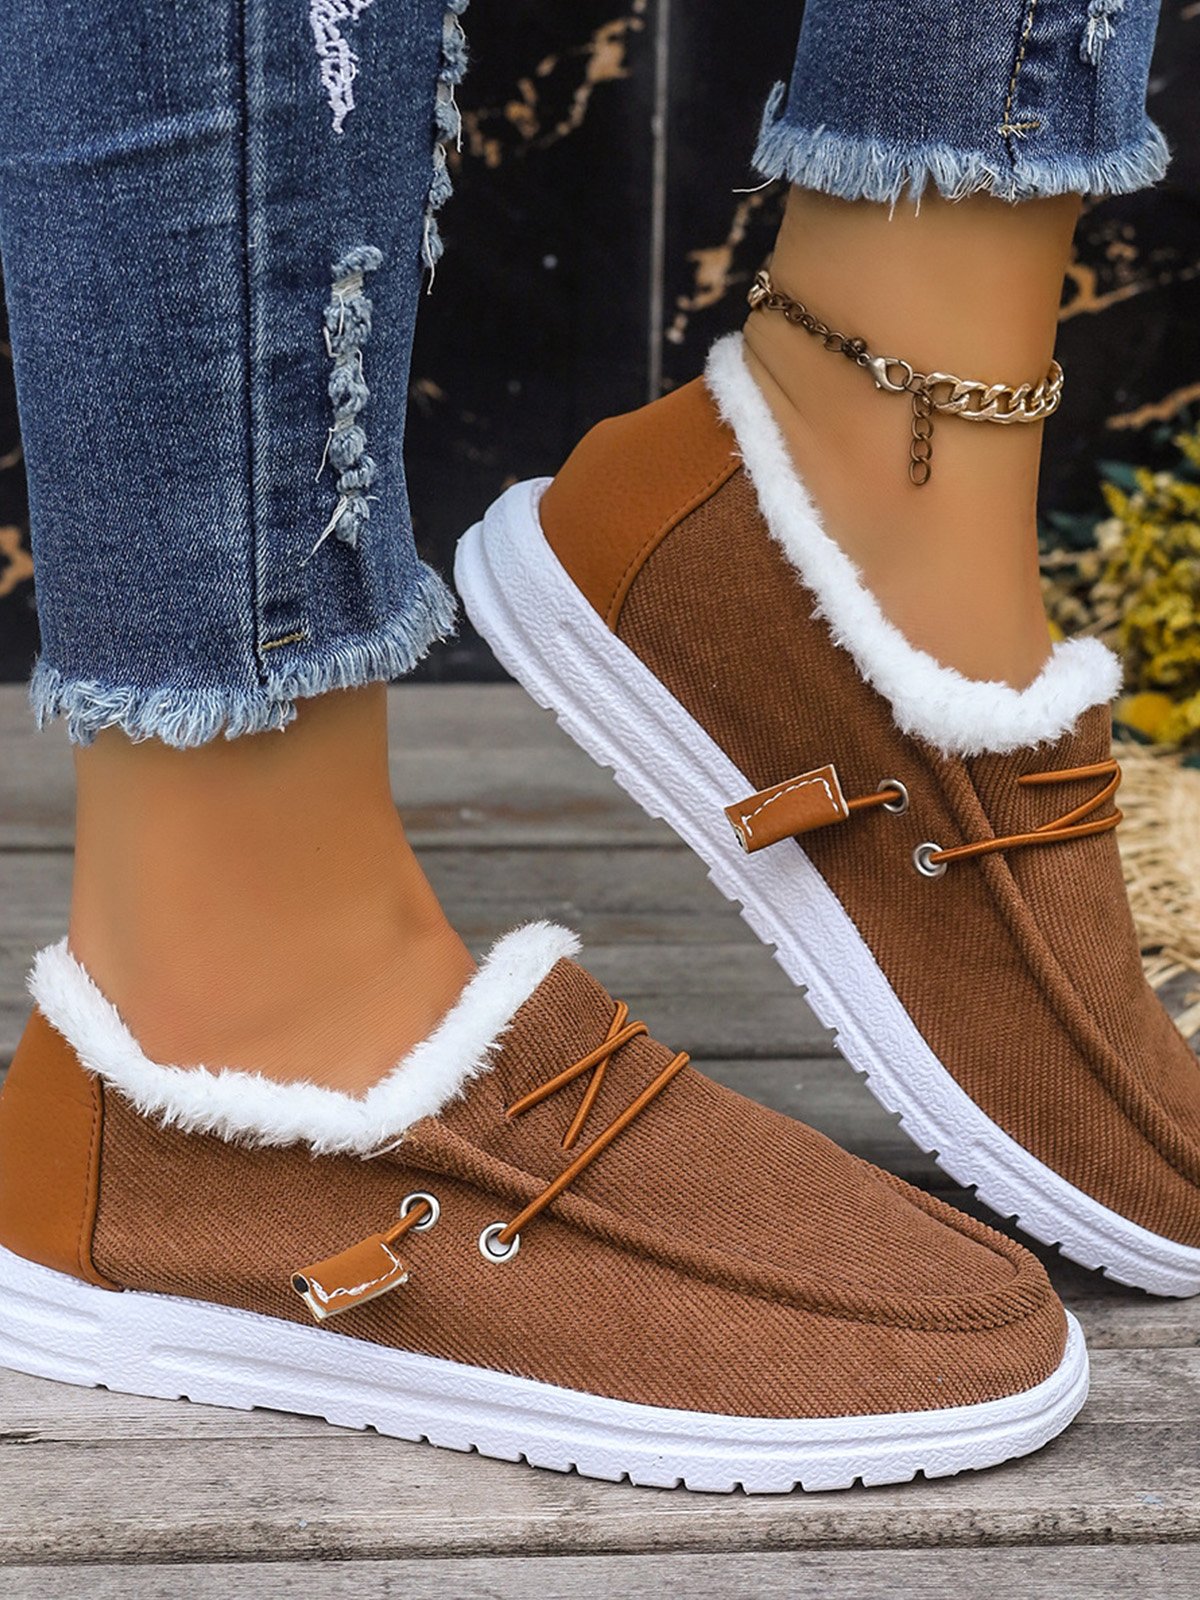 Casual Plain Lace-Up Flat Heel Loafers